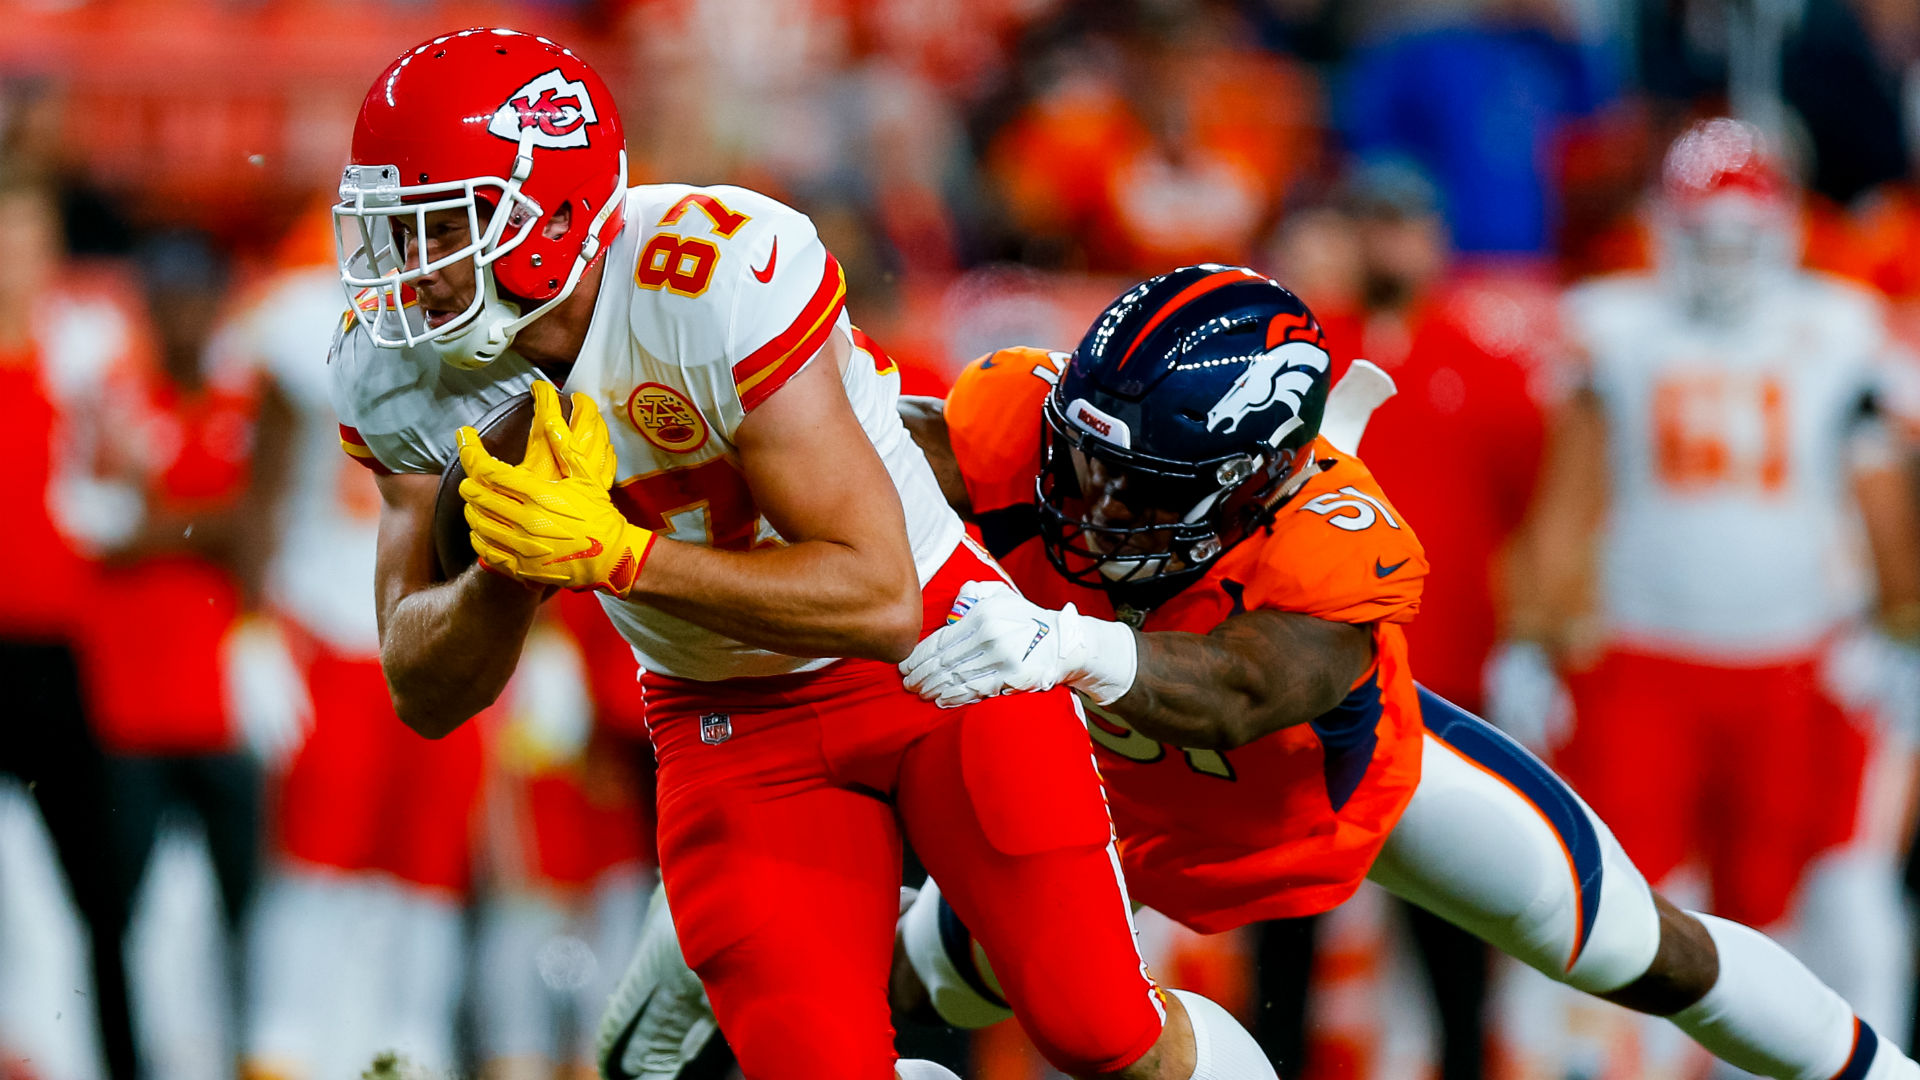 Flipboard: Three takeaways from Chiefs' road win over the Broncos1920 x 1080